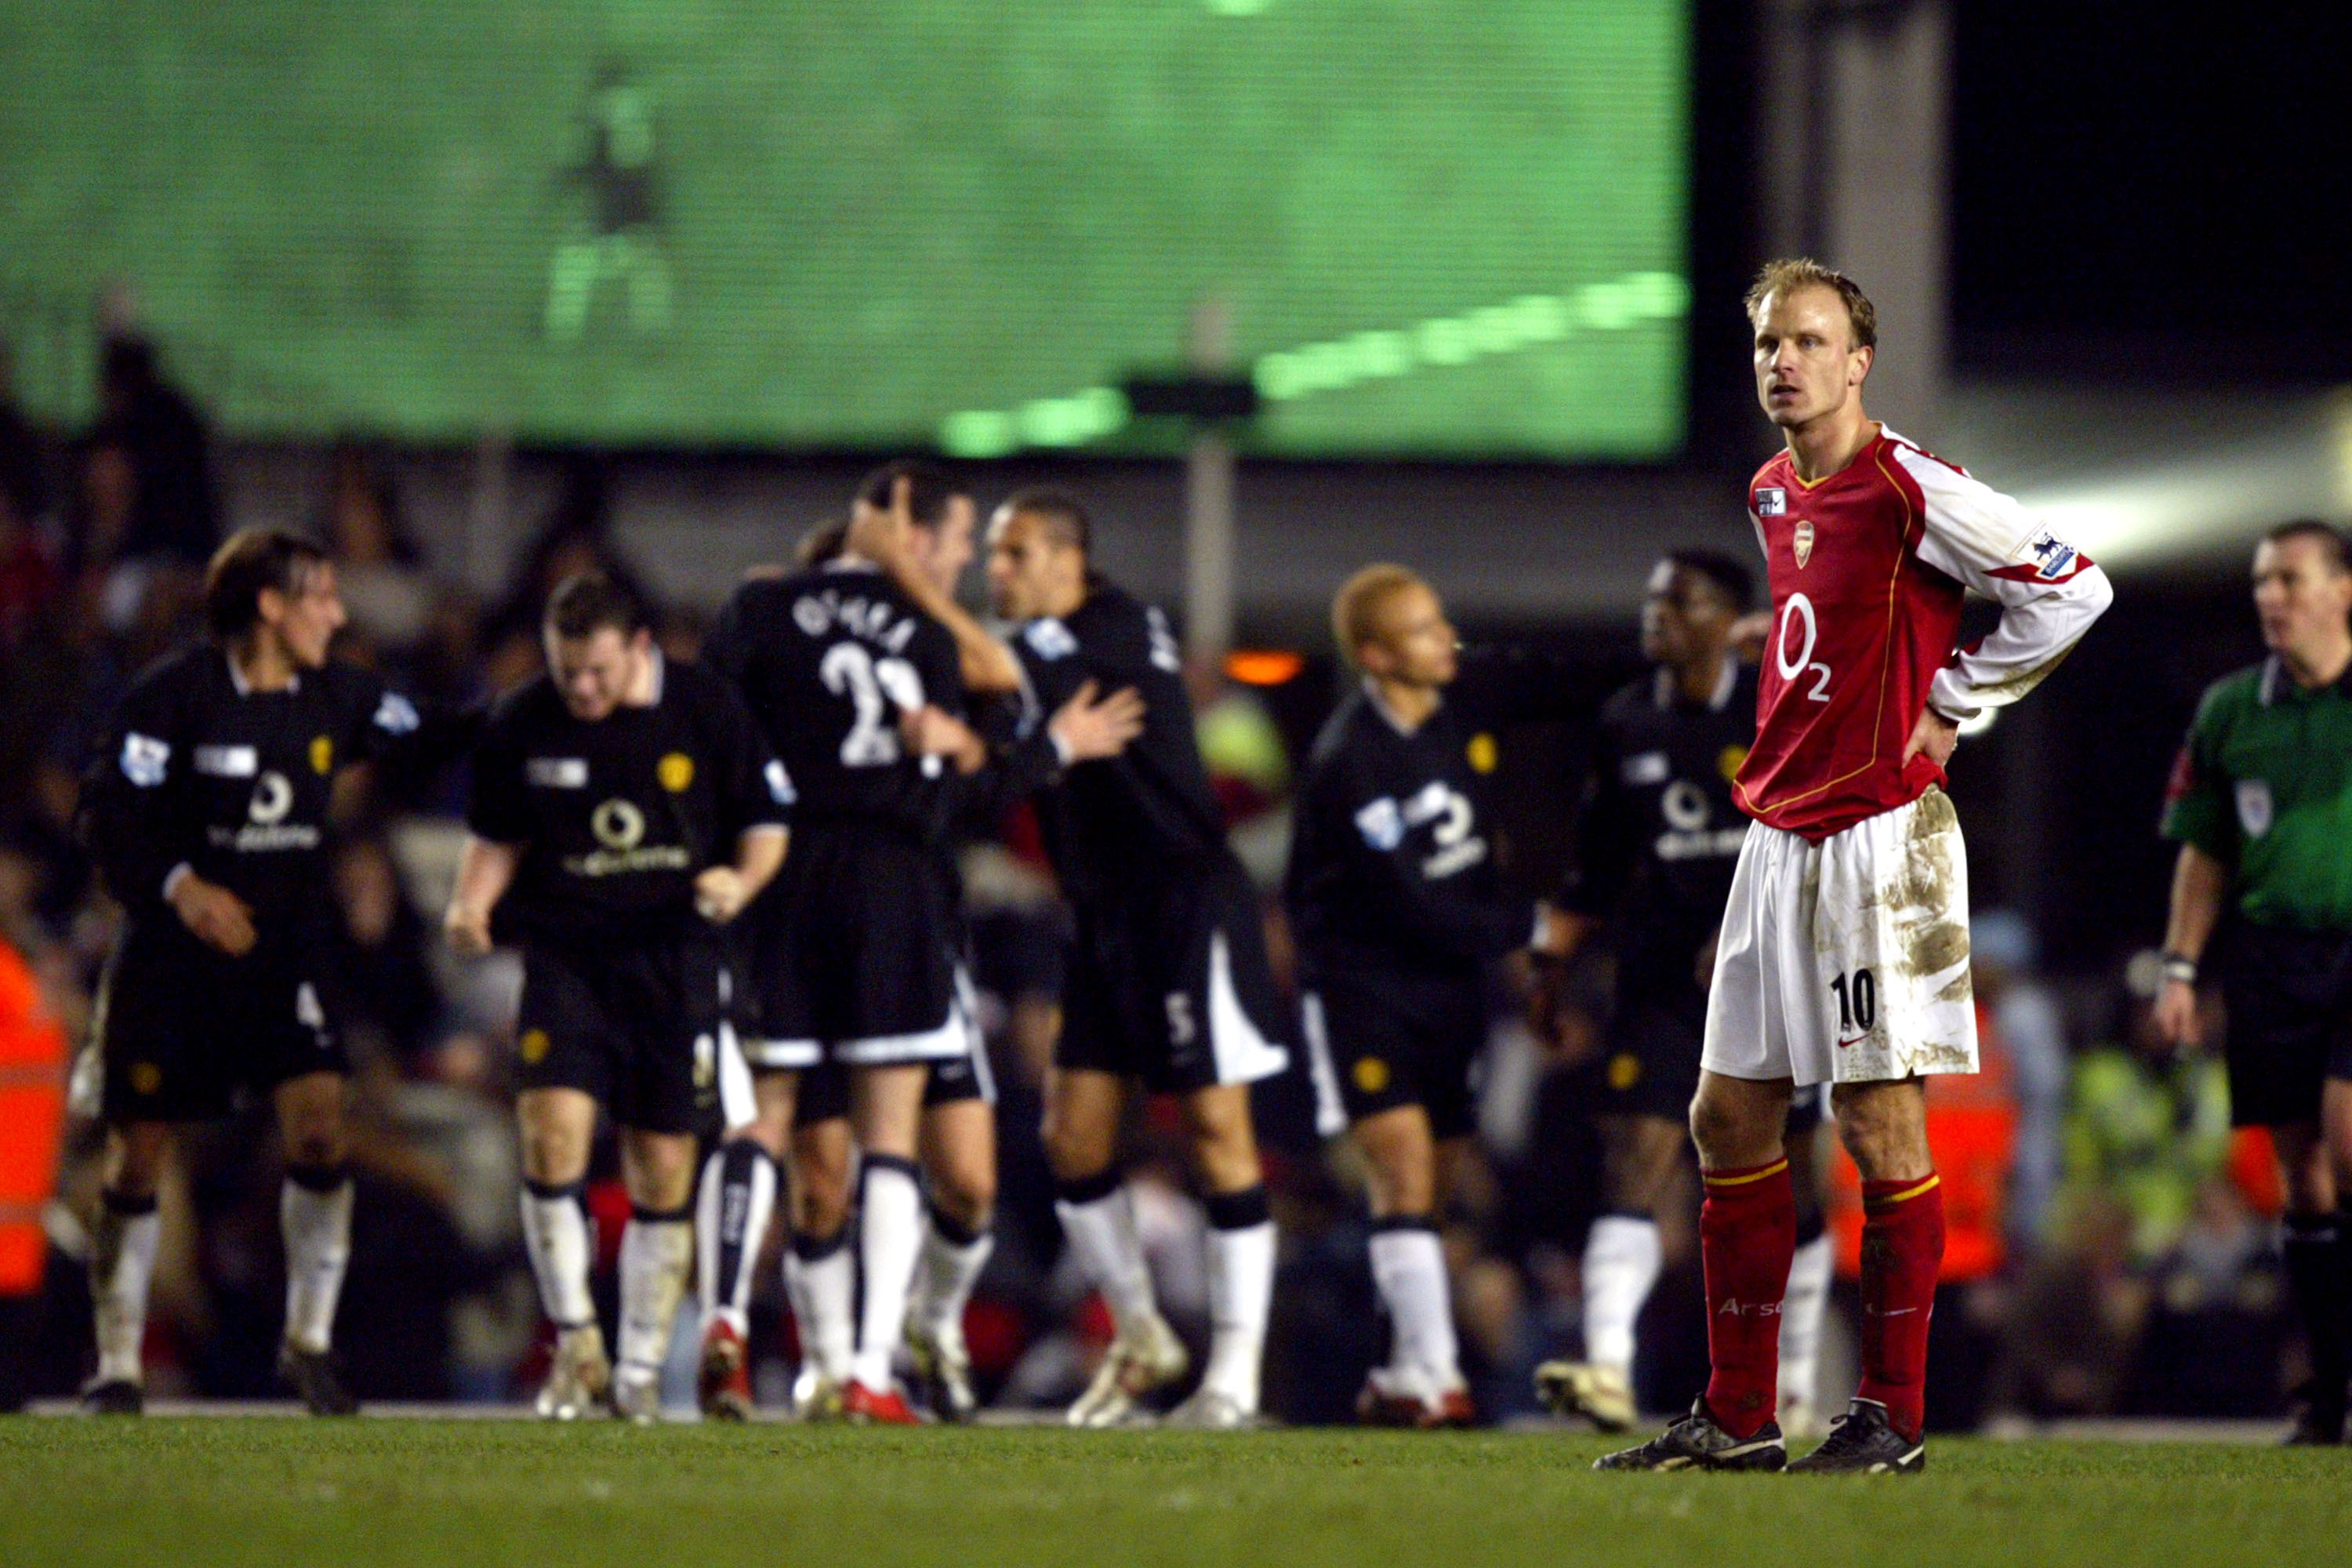 Manchester United players celebrate while Dennis Bergkamp looks on